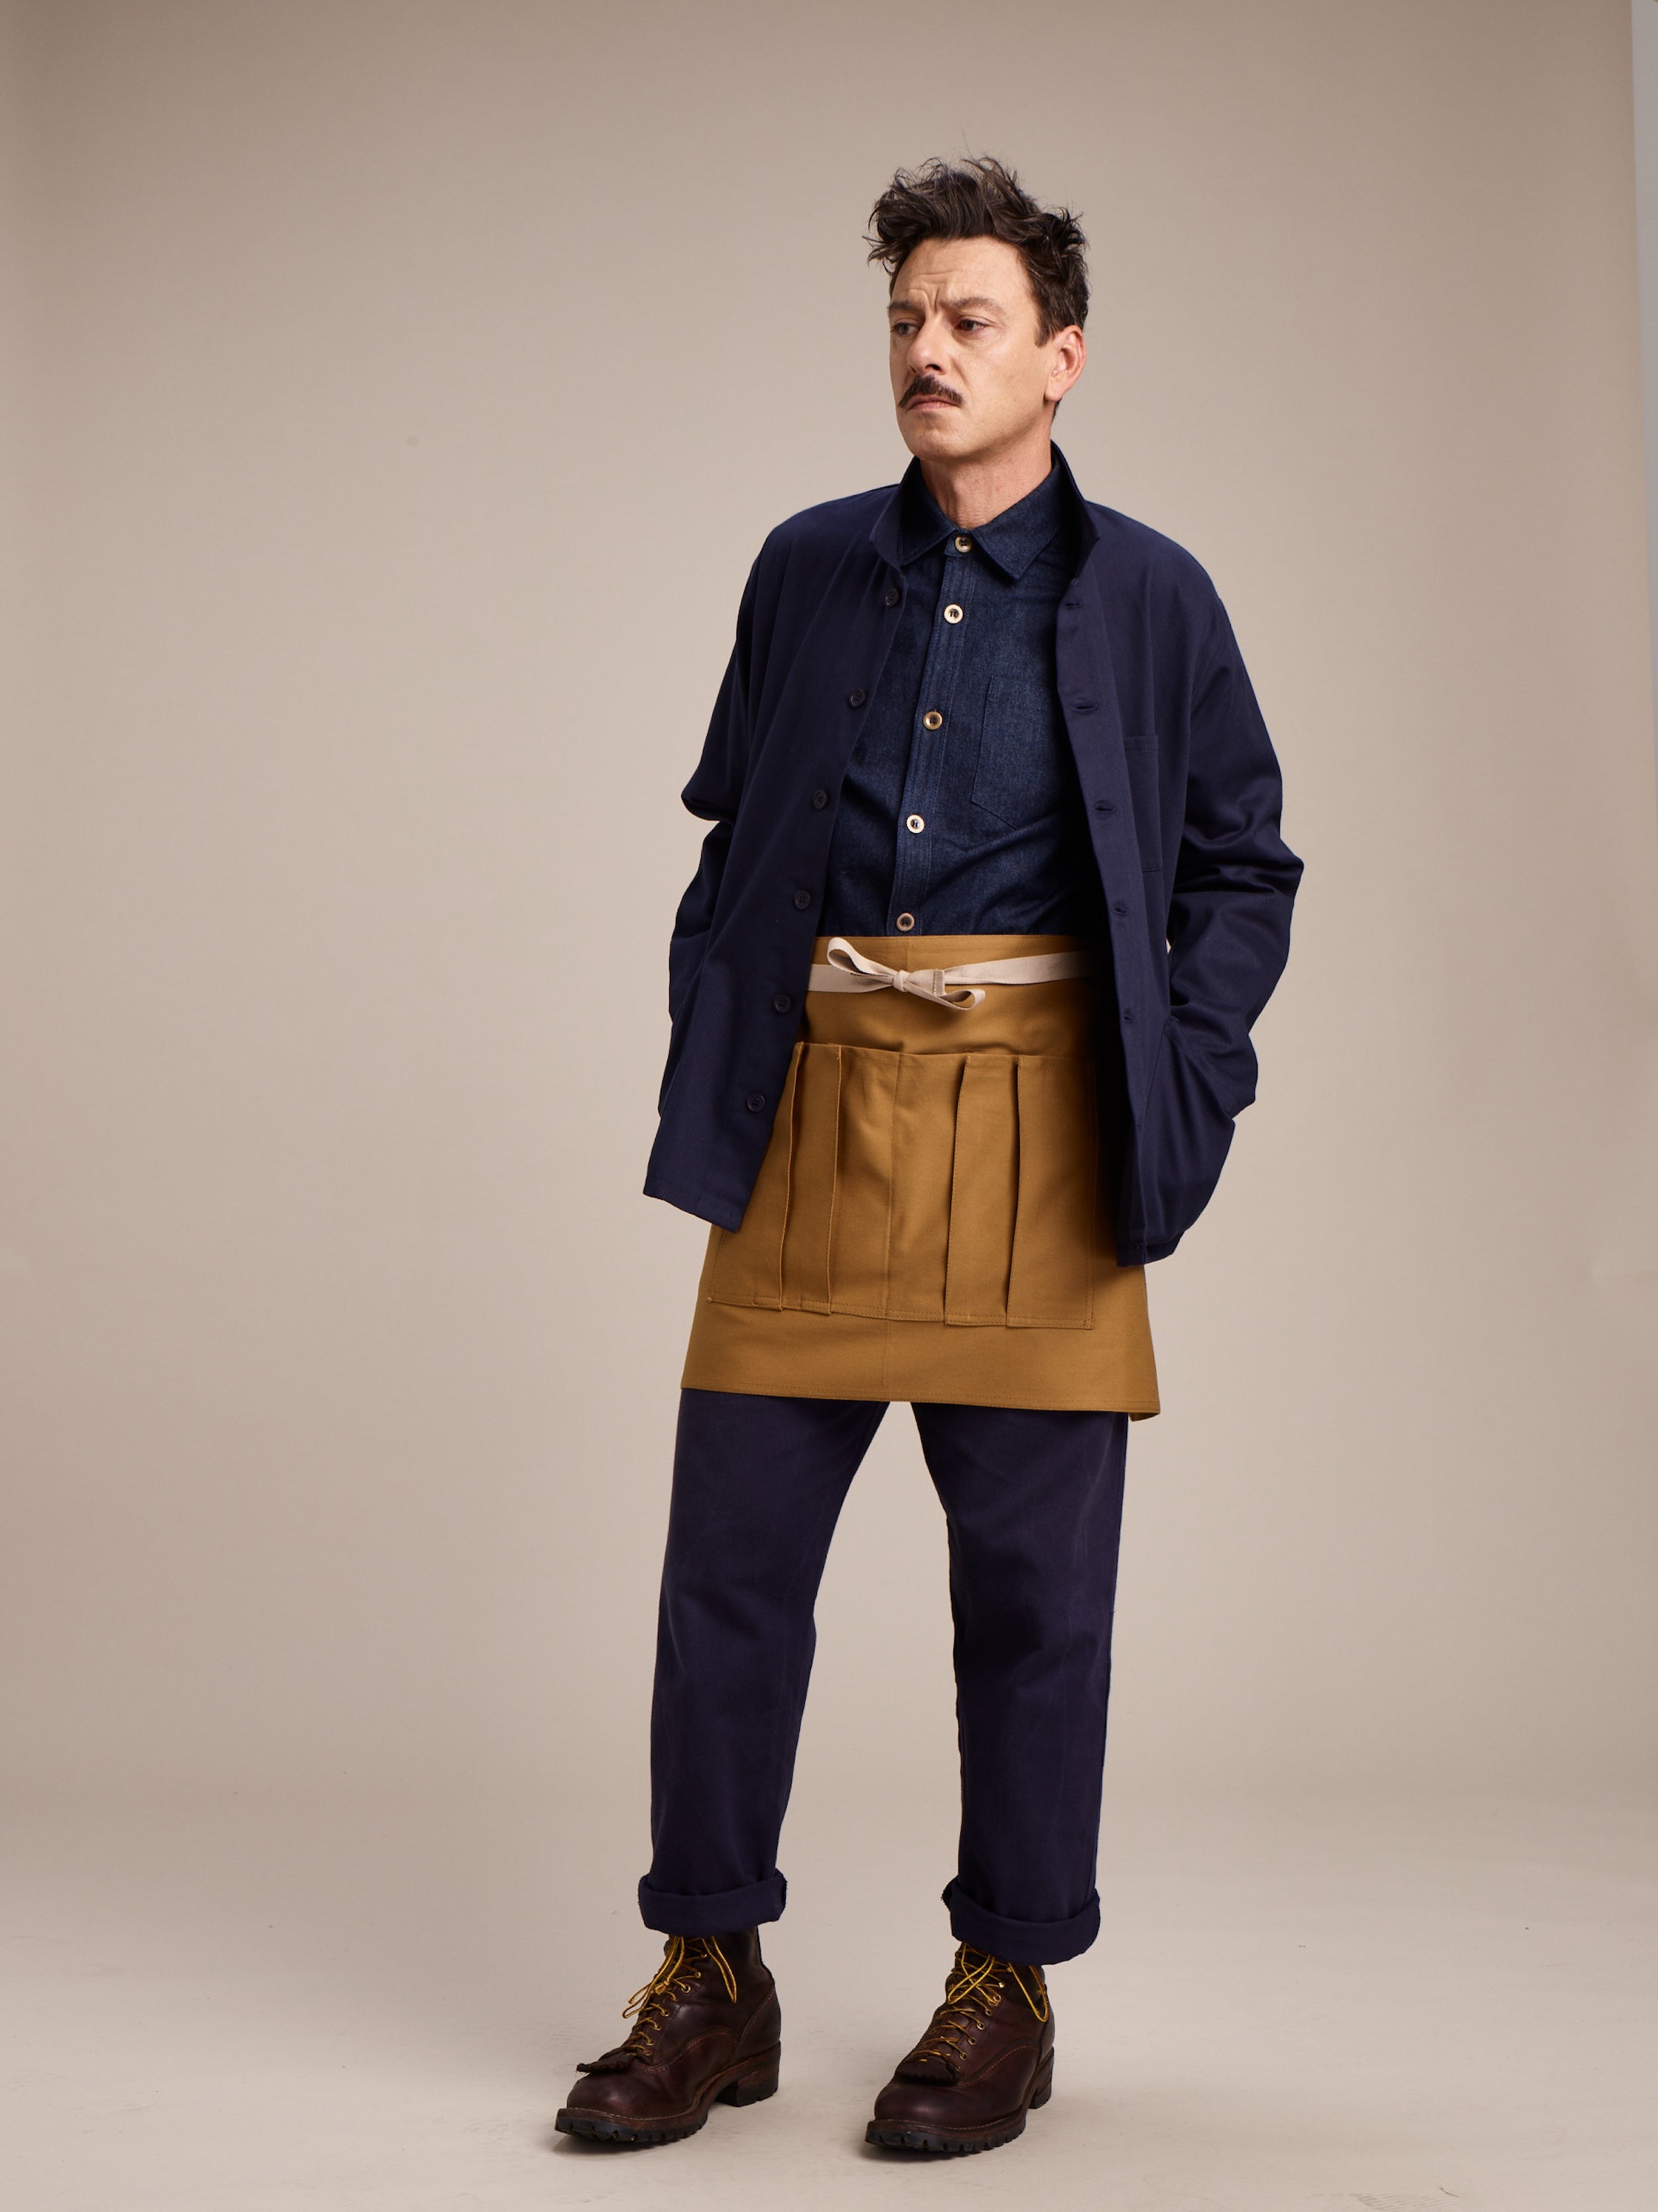 Man wearing Carrier Company Traditional Norfolk Work Jacket in Navy with Denim Collar Shirt and Navy Work Trouser and Gardener's Half Apron